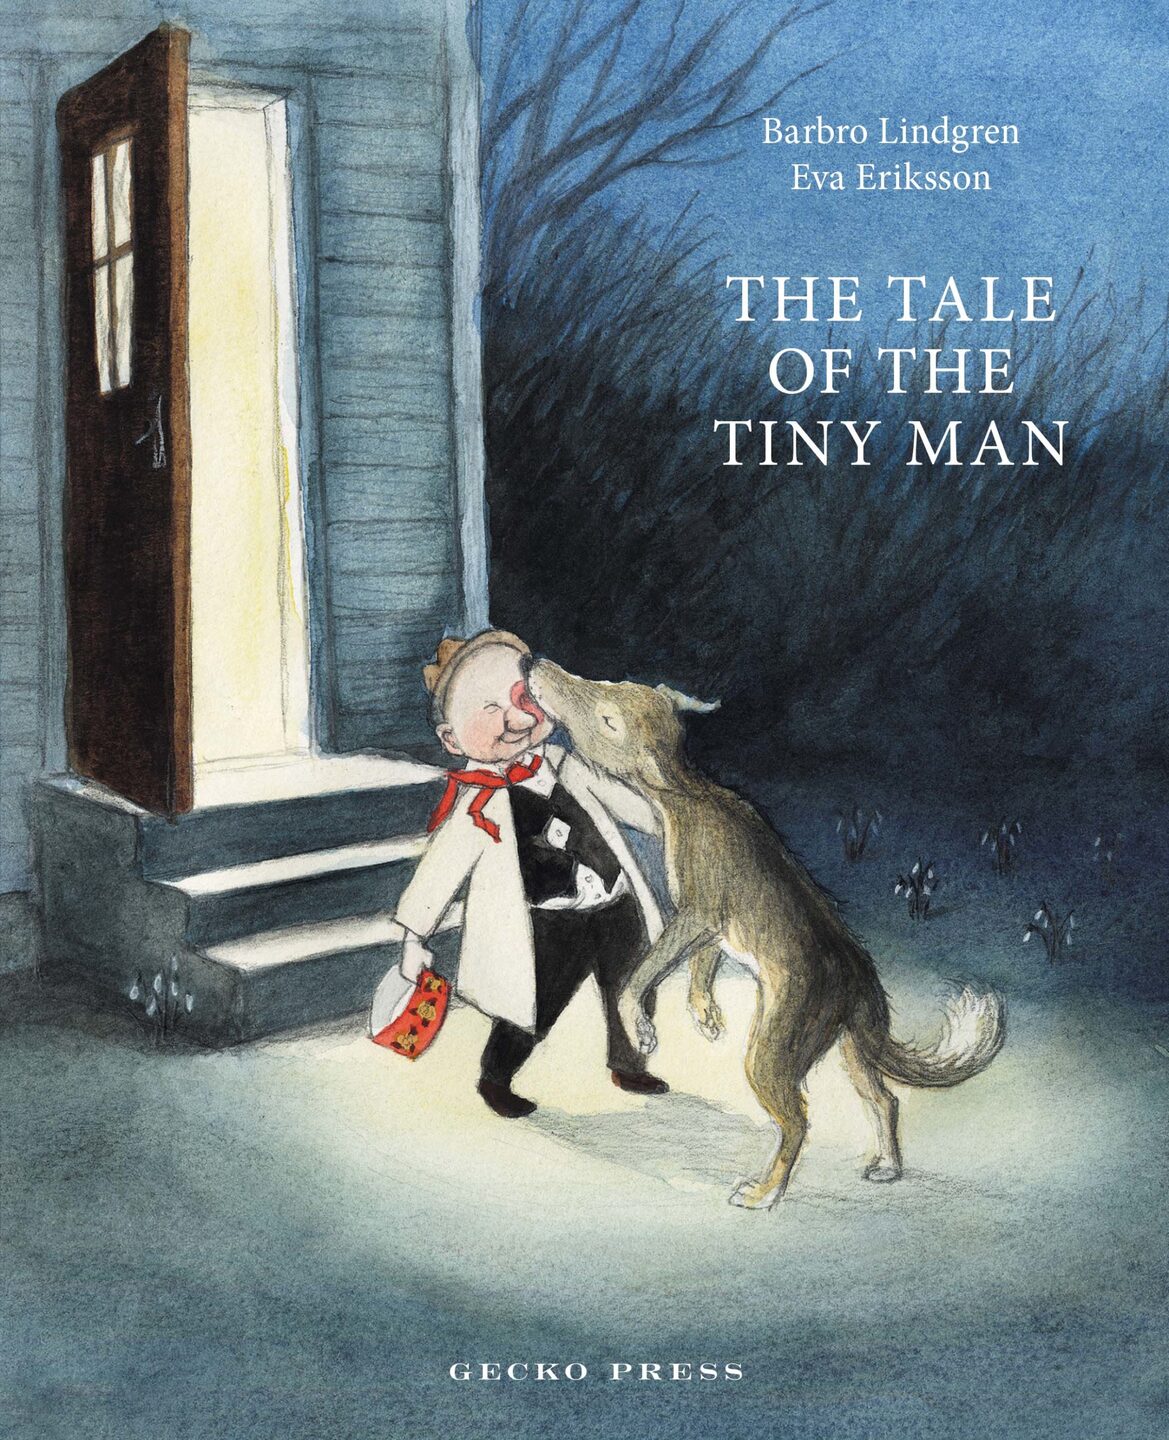 Gecko　Press　of　The　Tiny　Man　Tale　the